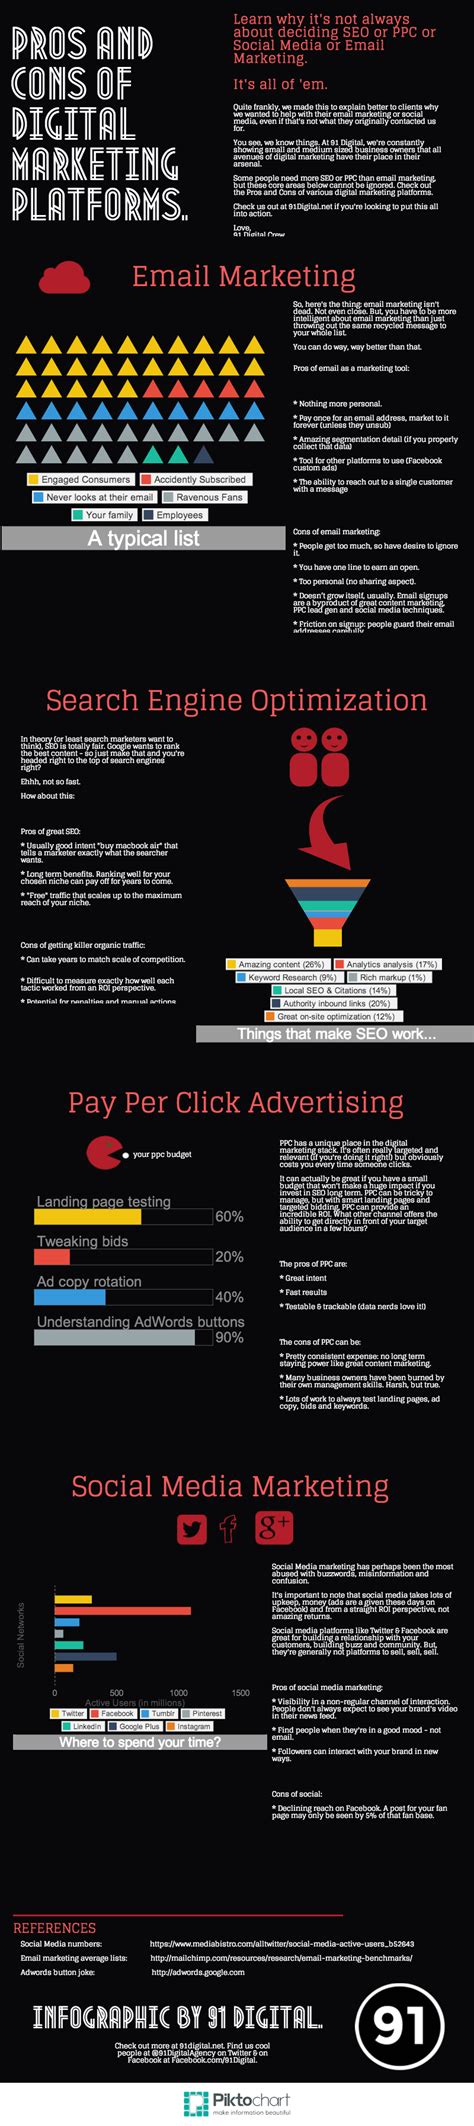 The Pros And Cons Of Digital Marketing Platforms Infographic